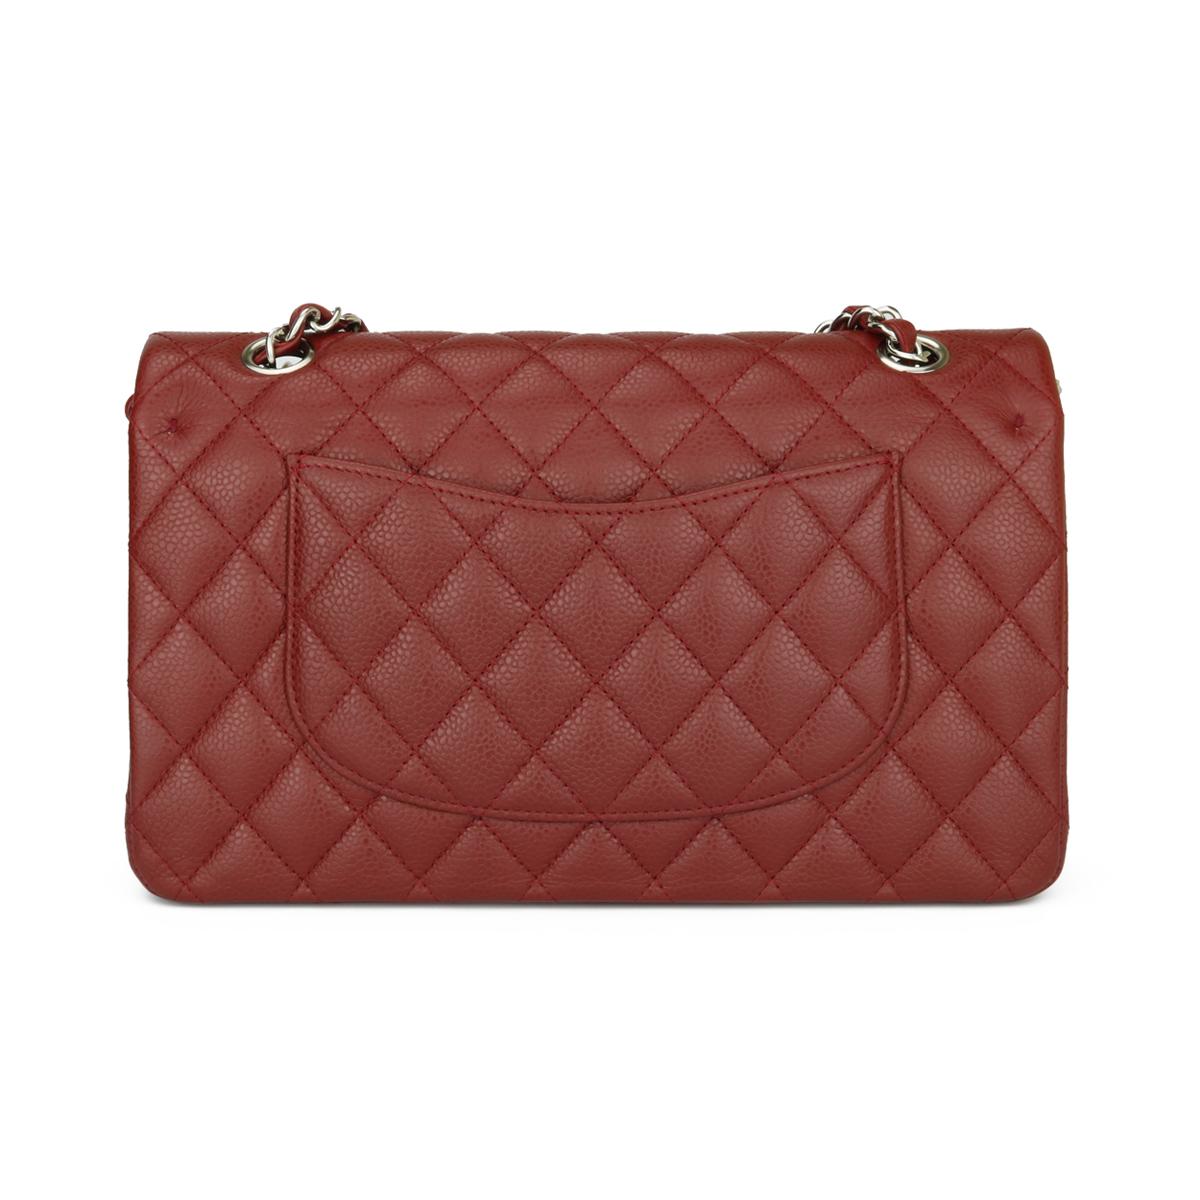 CHANEL Classic Double Flap Bag Medium Burgundy Caviar with Silver Hardware 2014.

This stunning bag is still in pristine condition, the bag still holds its original shape, and the hardware is very shiny. Leather still smells fresh as if new.

-